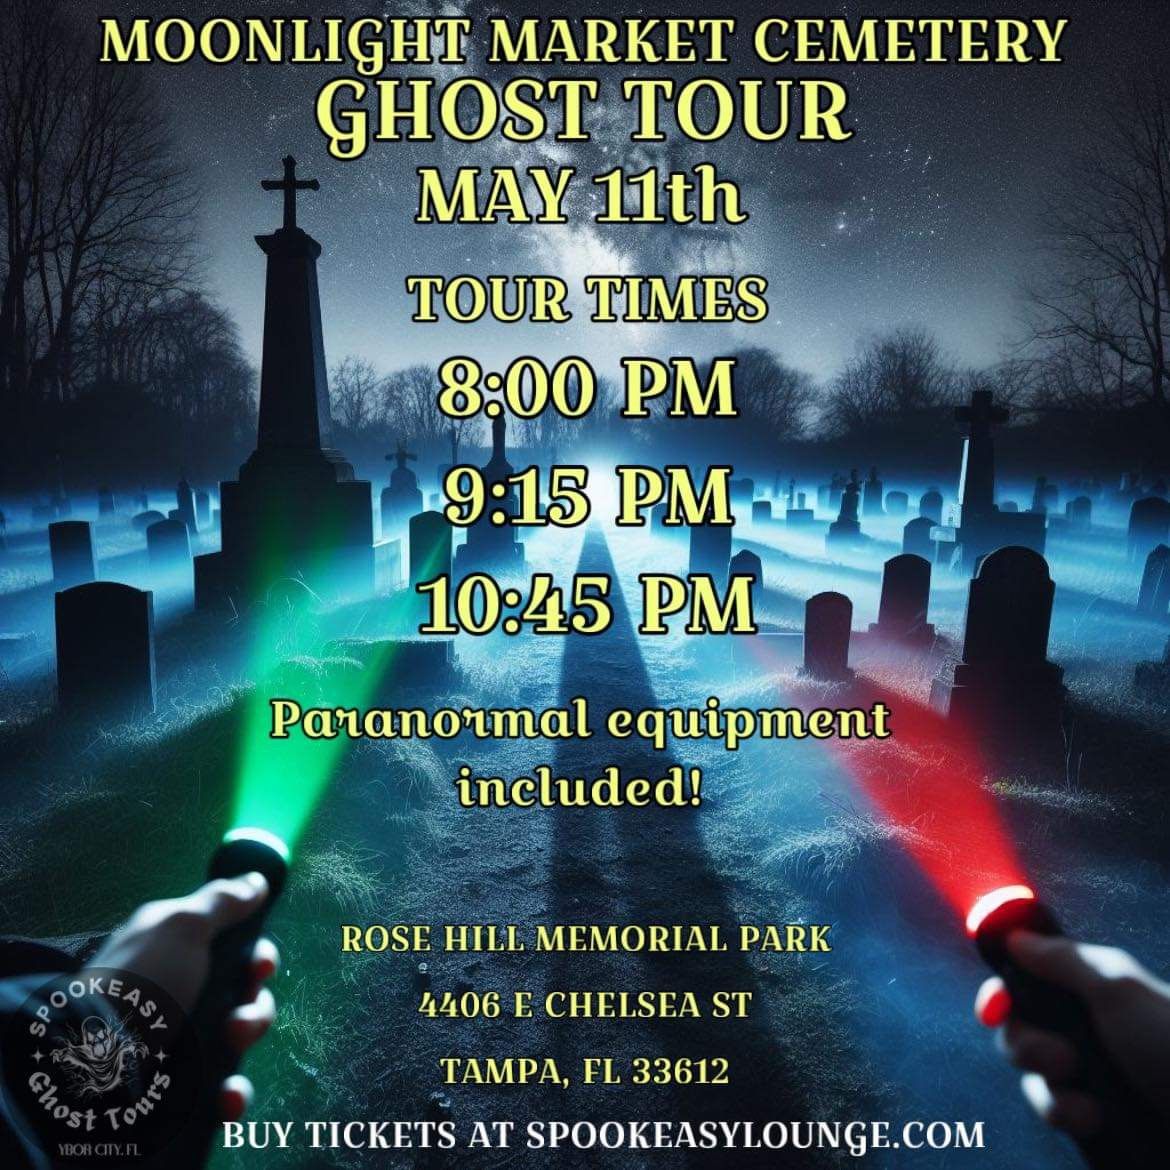 Cemetery Tour at the CommUnity Moonlight Market